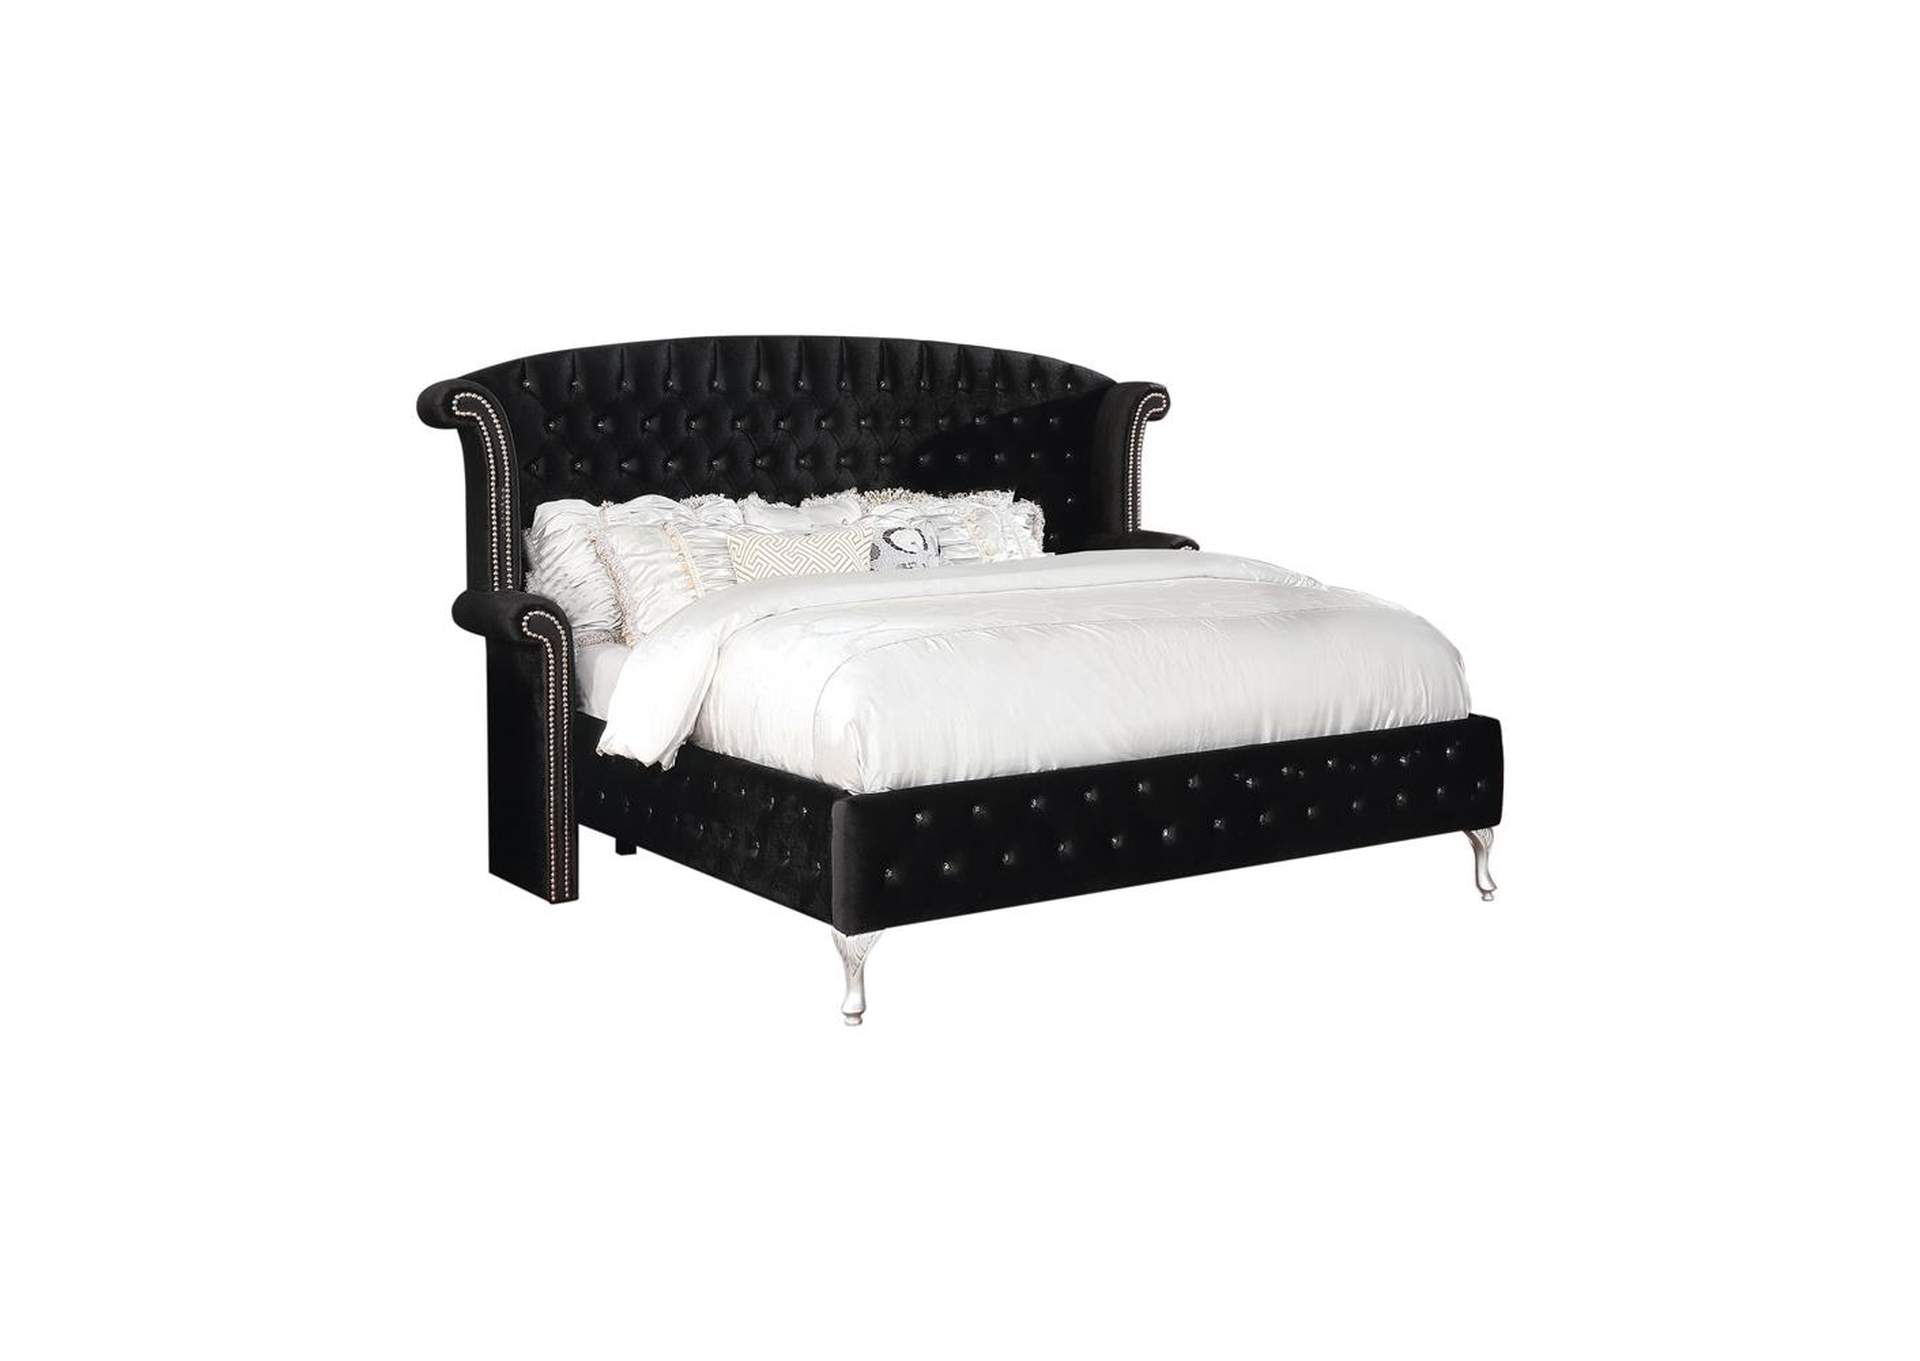 Deanna Contemporary Eastern King Bed,Coaster Furniture